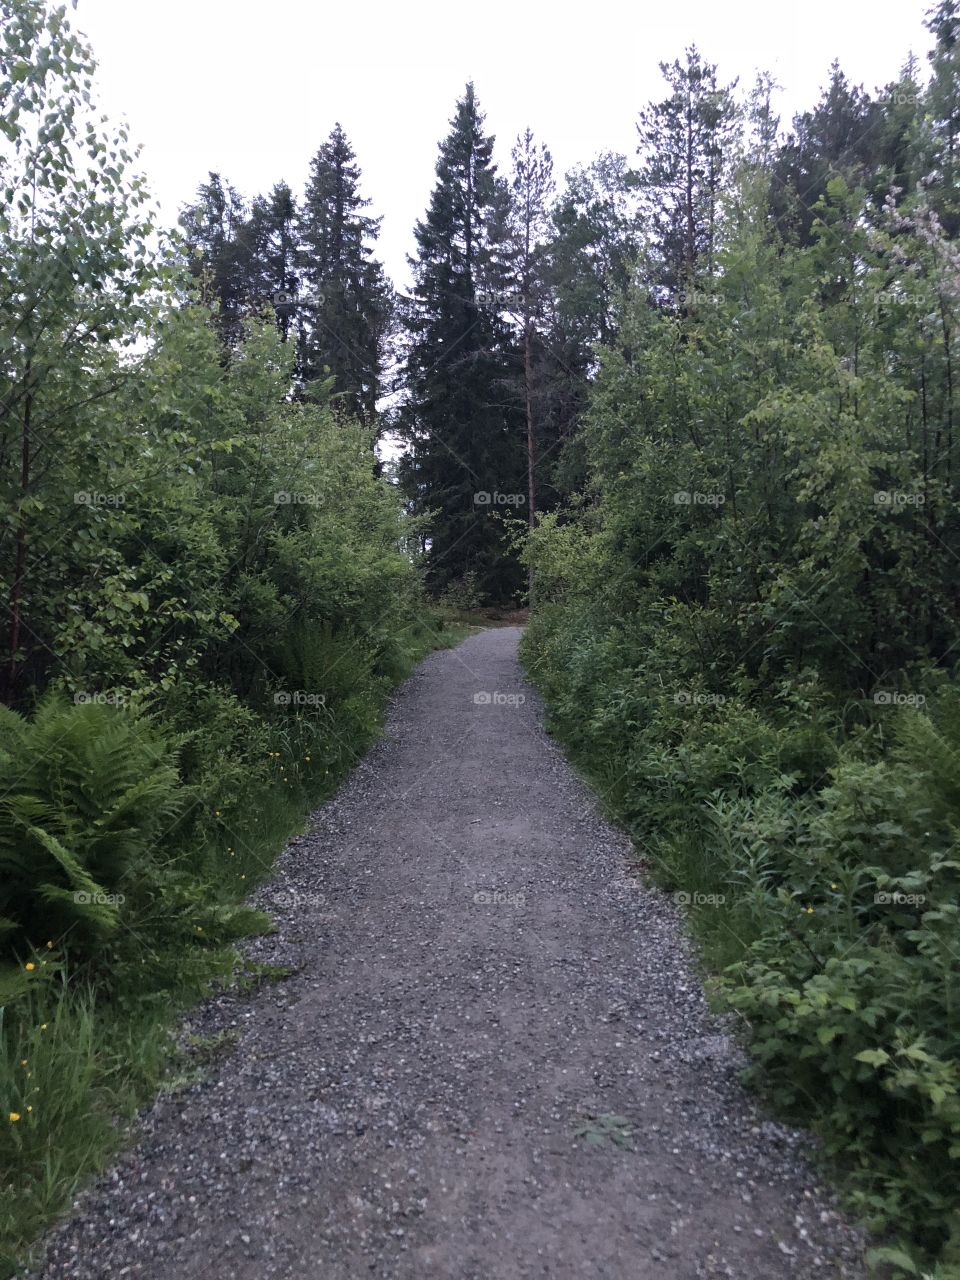 A Long Pathway Through the Woods